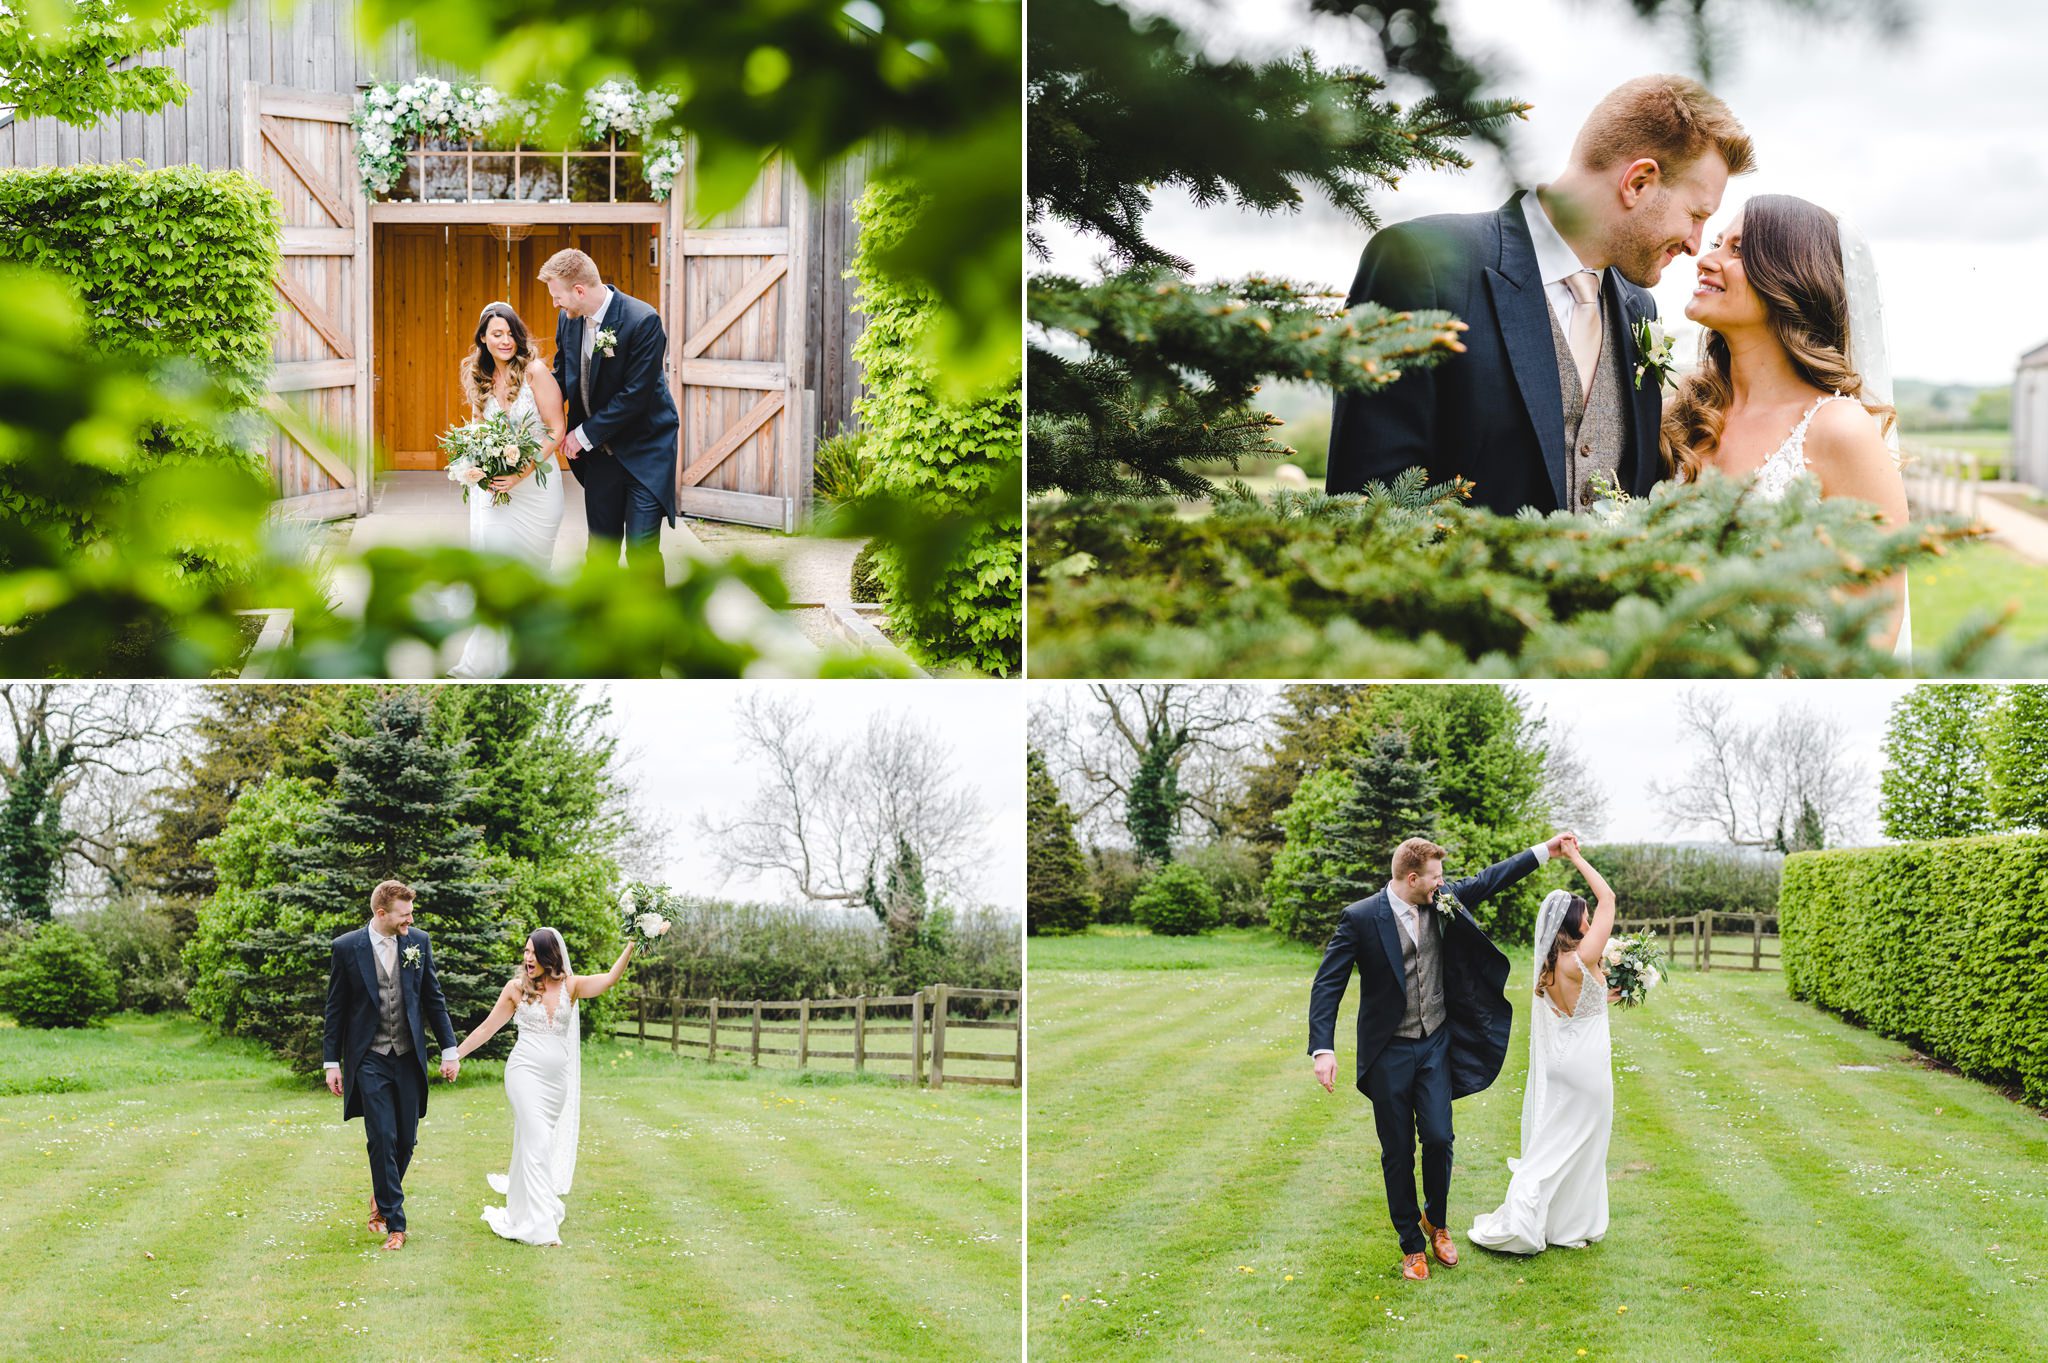 A bride and groom having fun during their photographs at their wedding at Hyde House